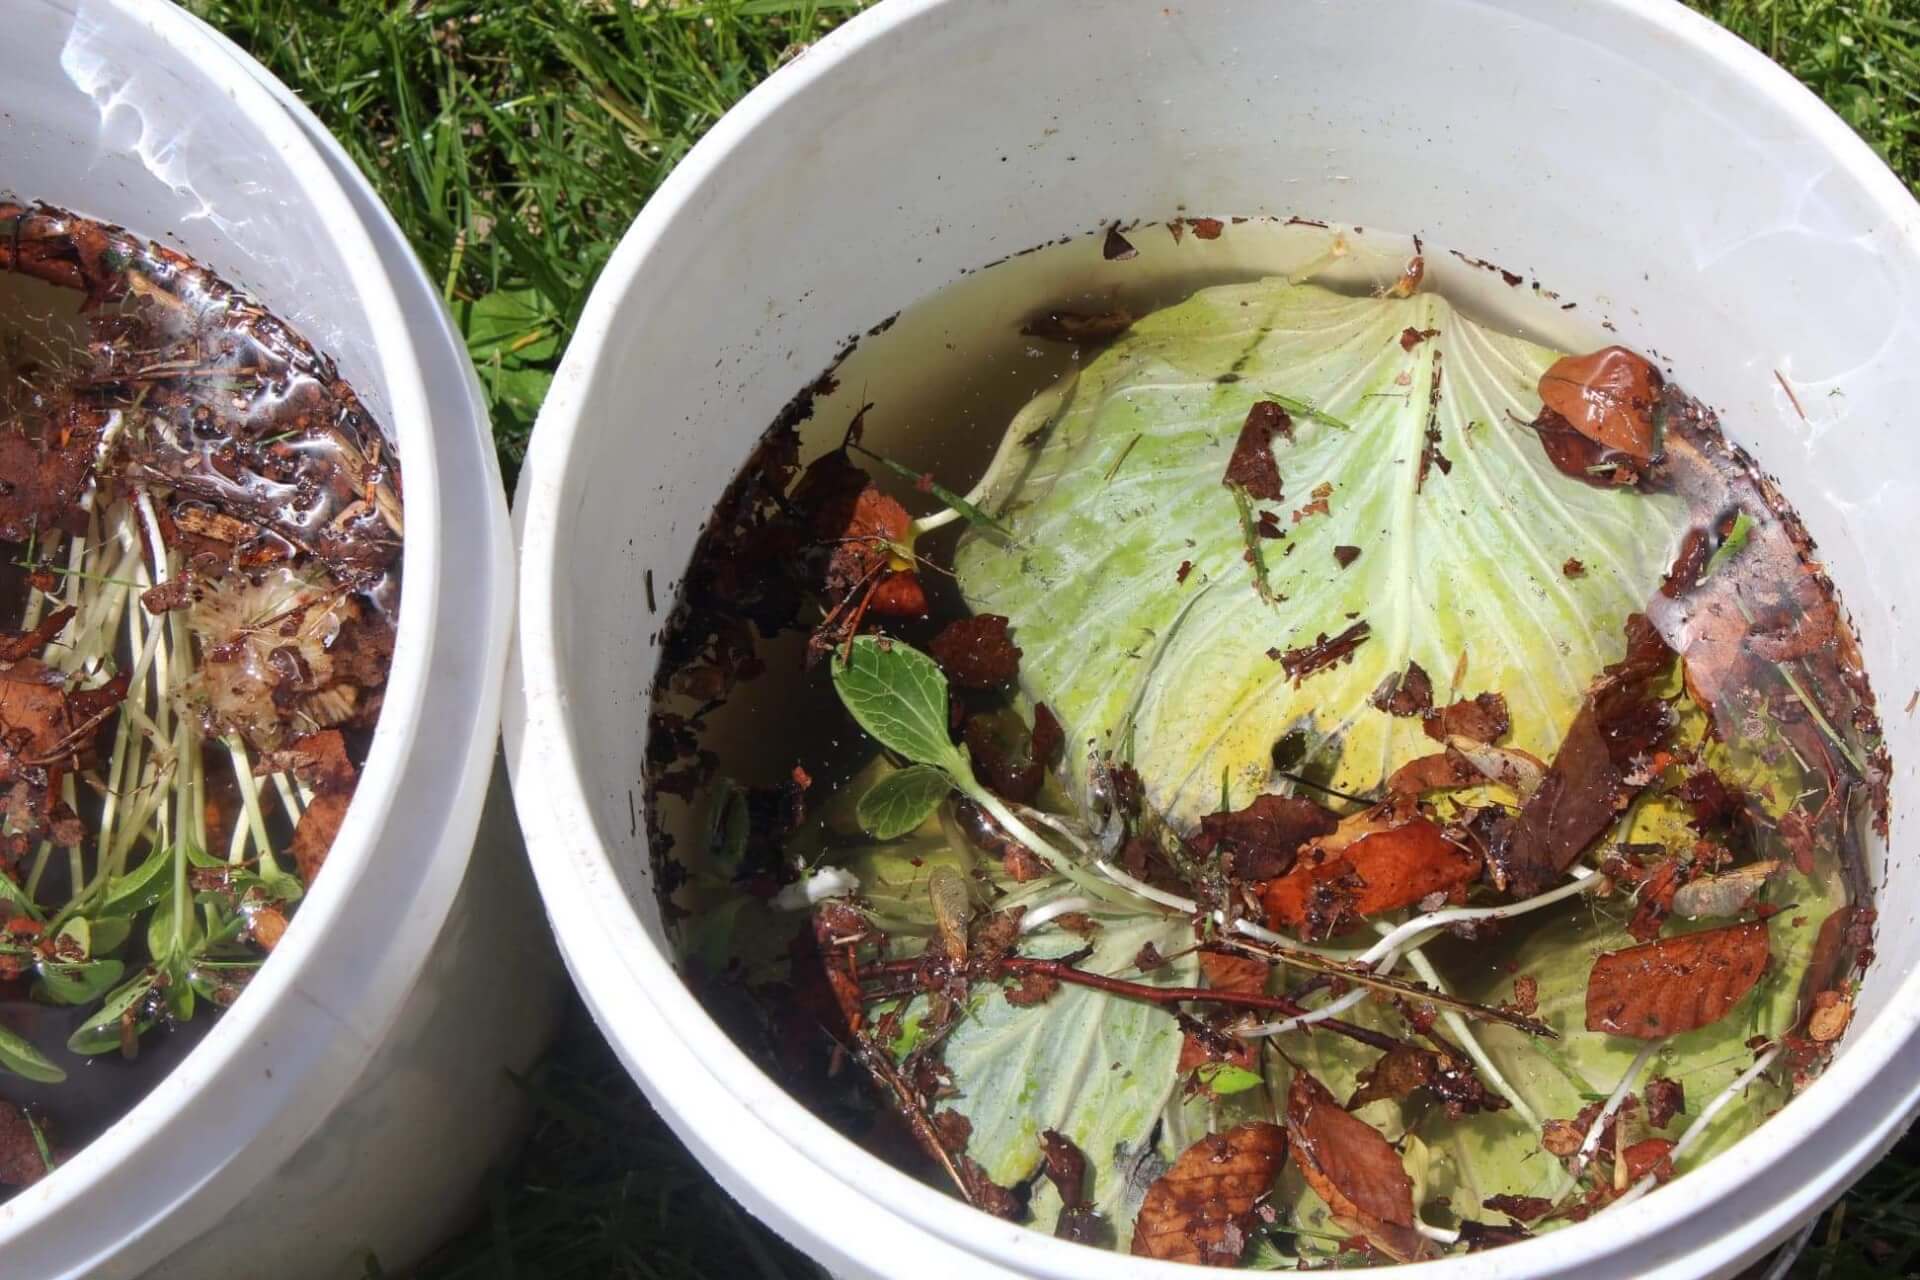 Two plastic buckets with water and compost.